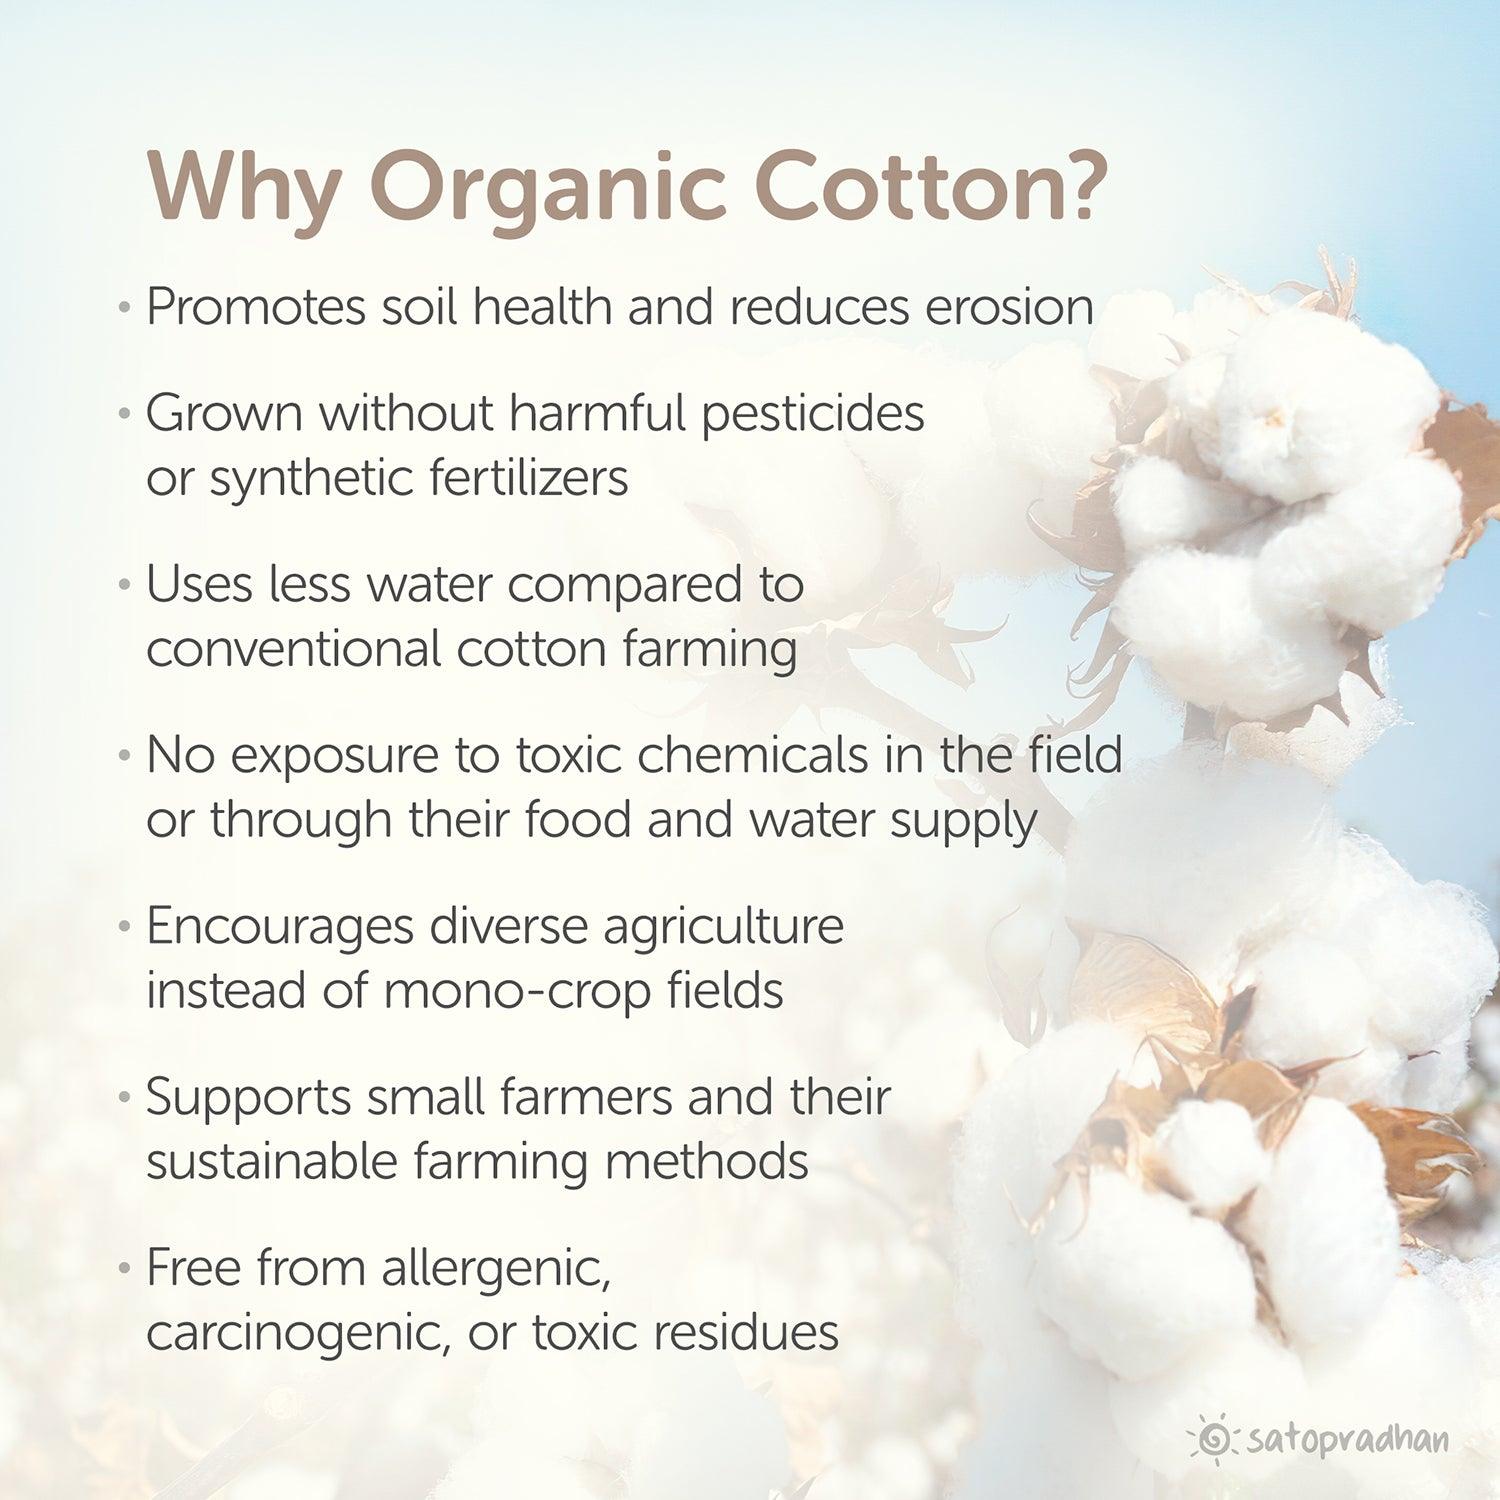 Using Organic cotton helps is supporting sustainable agriculture and enviornment by not using the synthetic fertilizers and leaving toxic residues in water bodies and enviornment